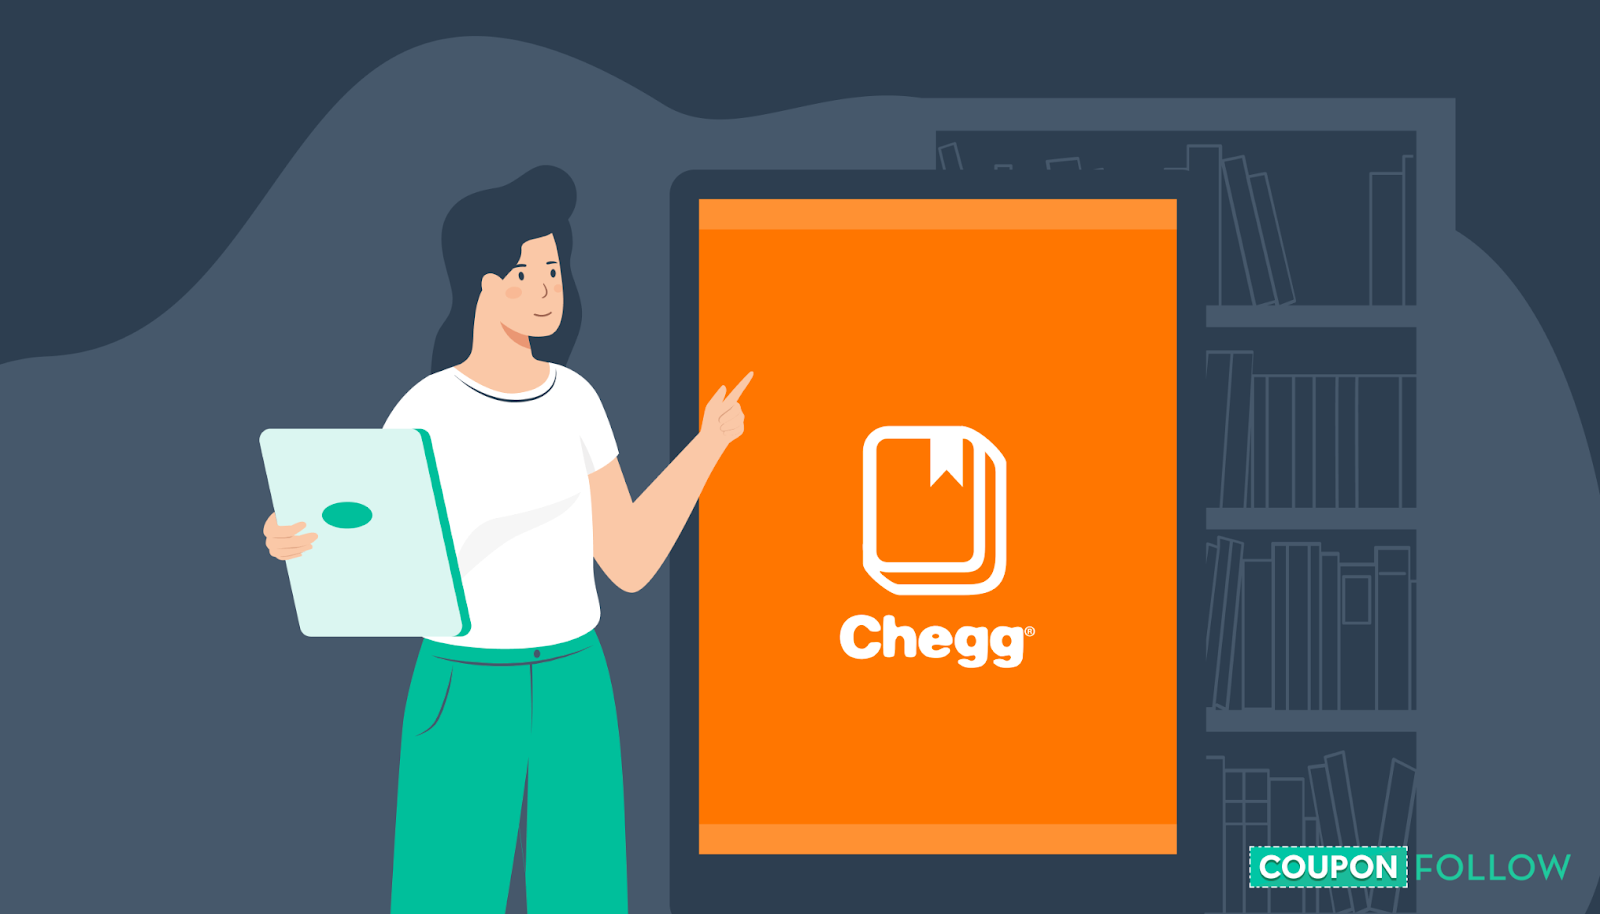 Illustration of student on tablet with Chegg logo on screen